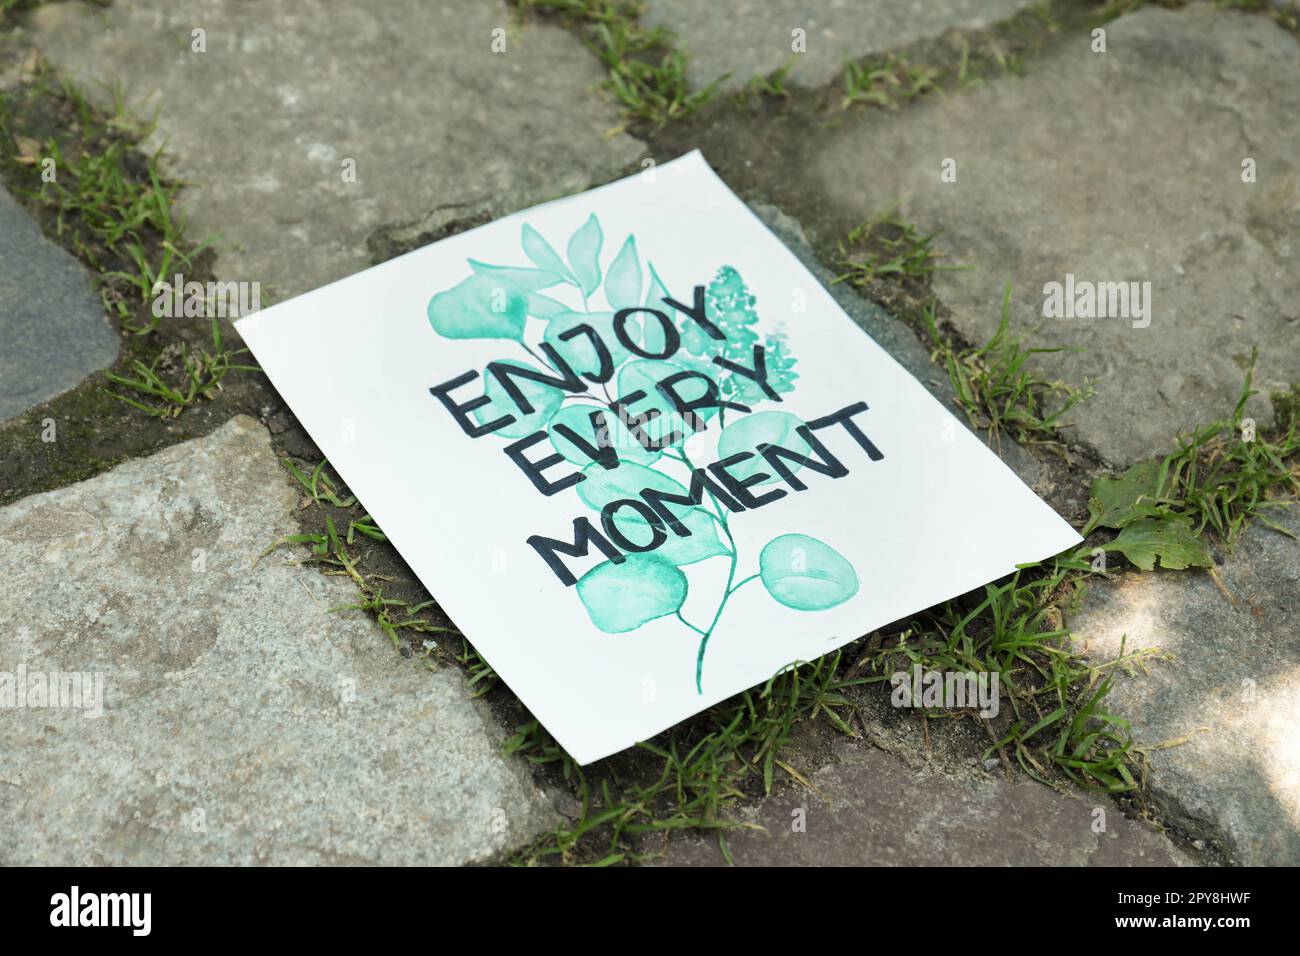 Card with phrase Enjoy Every Moment on ground Stock Photo